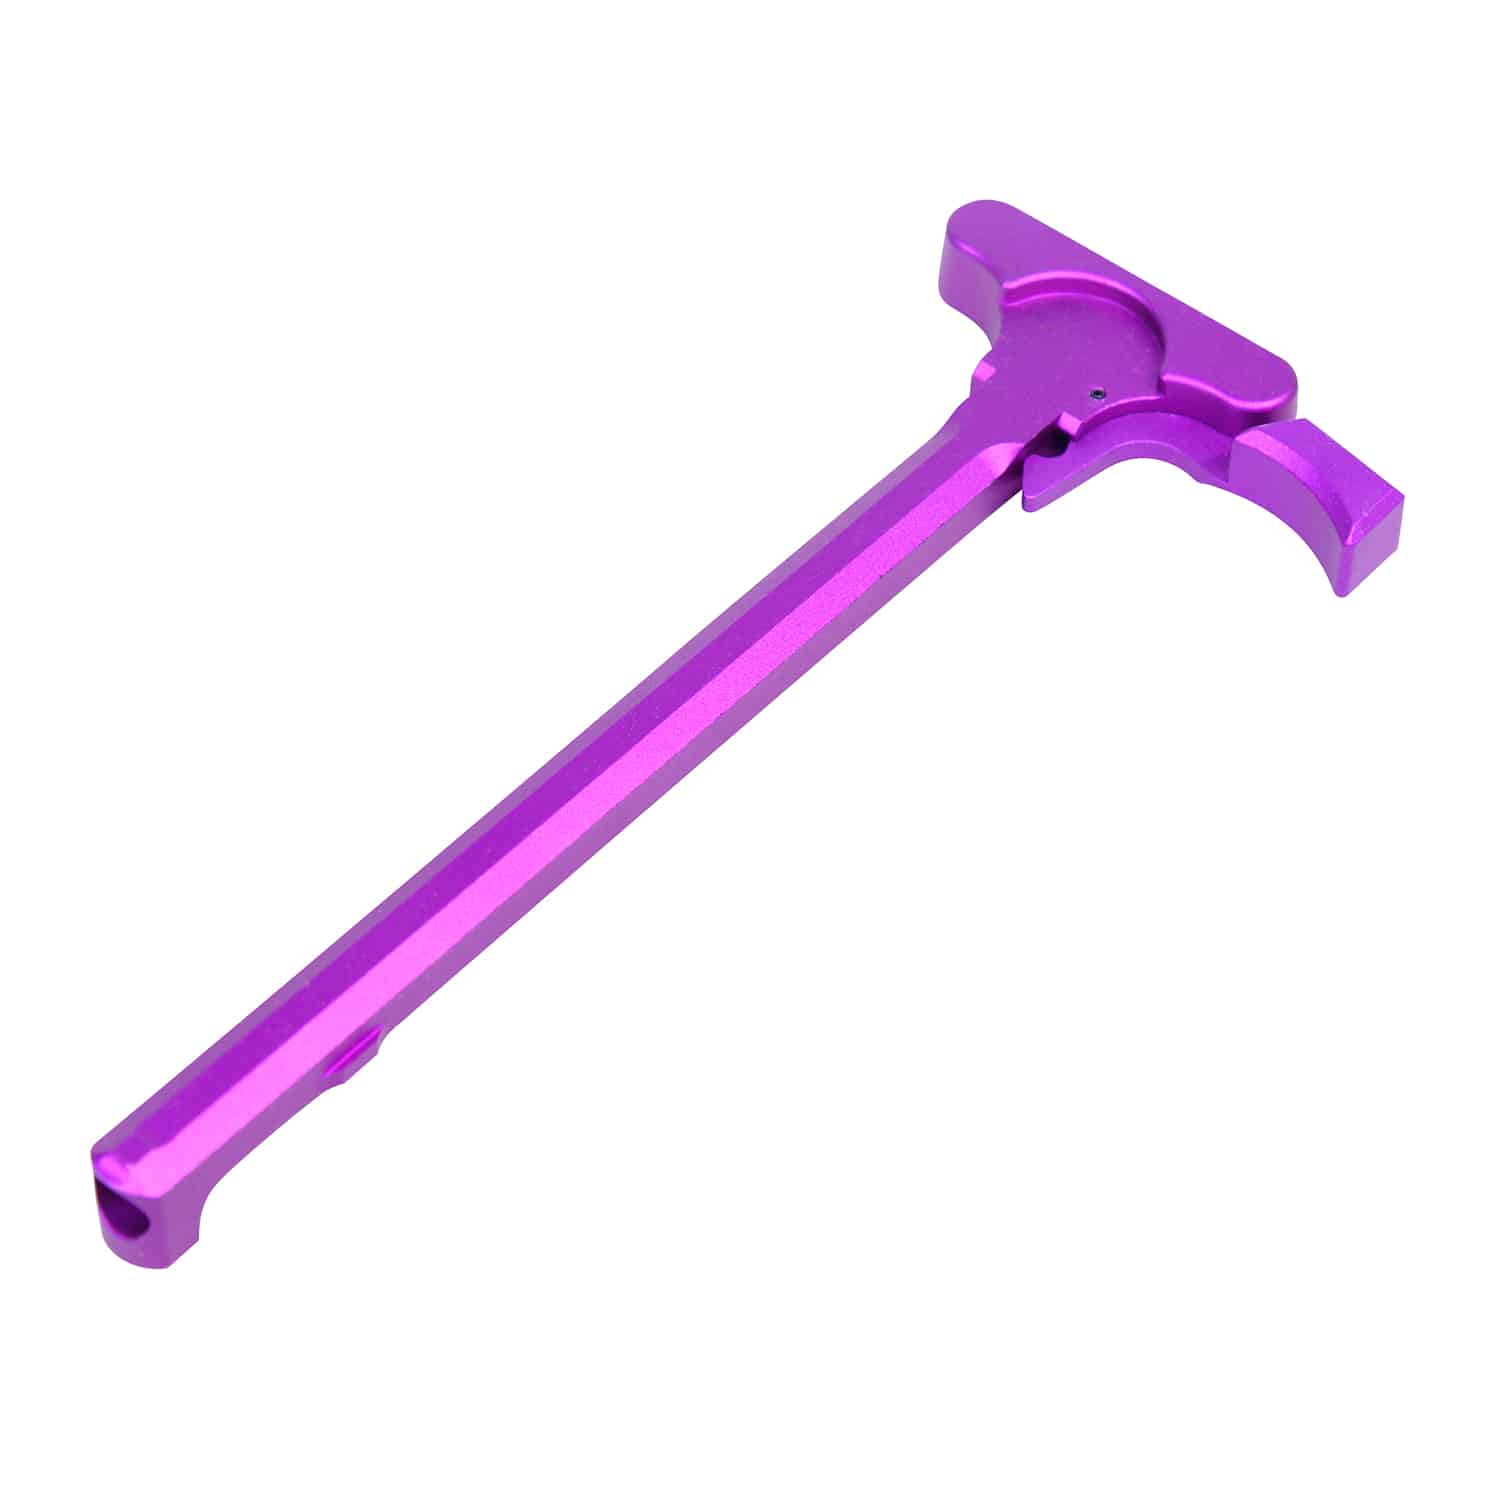 AR-15 Charging Handle with Gen 5 Latch in Anodized Purple